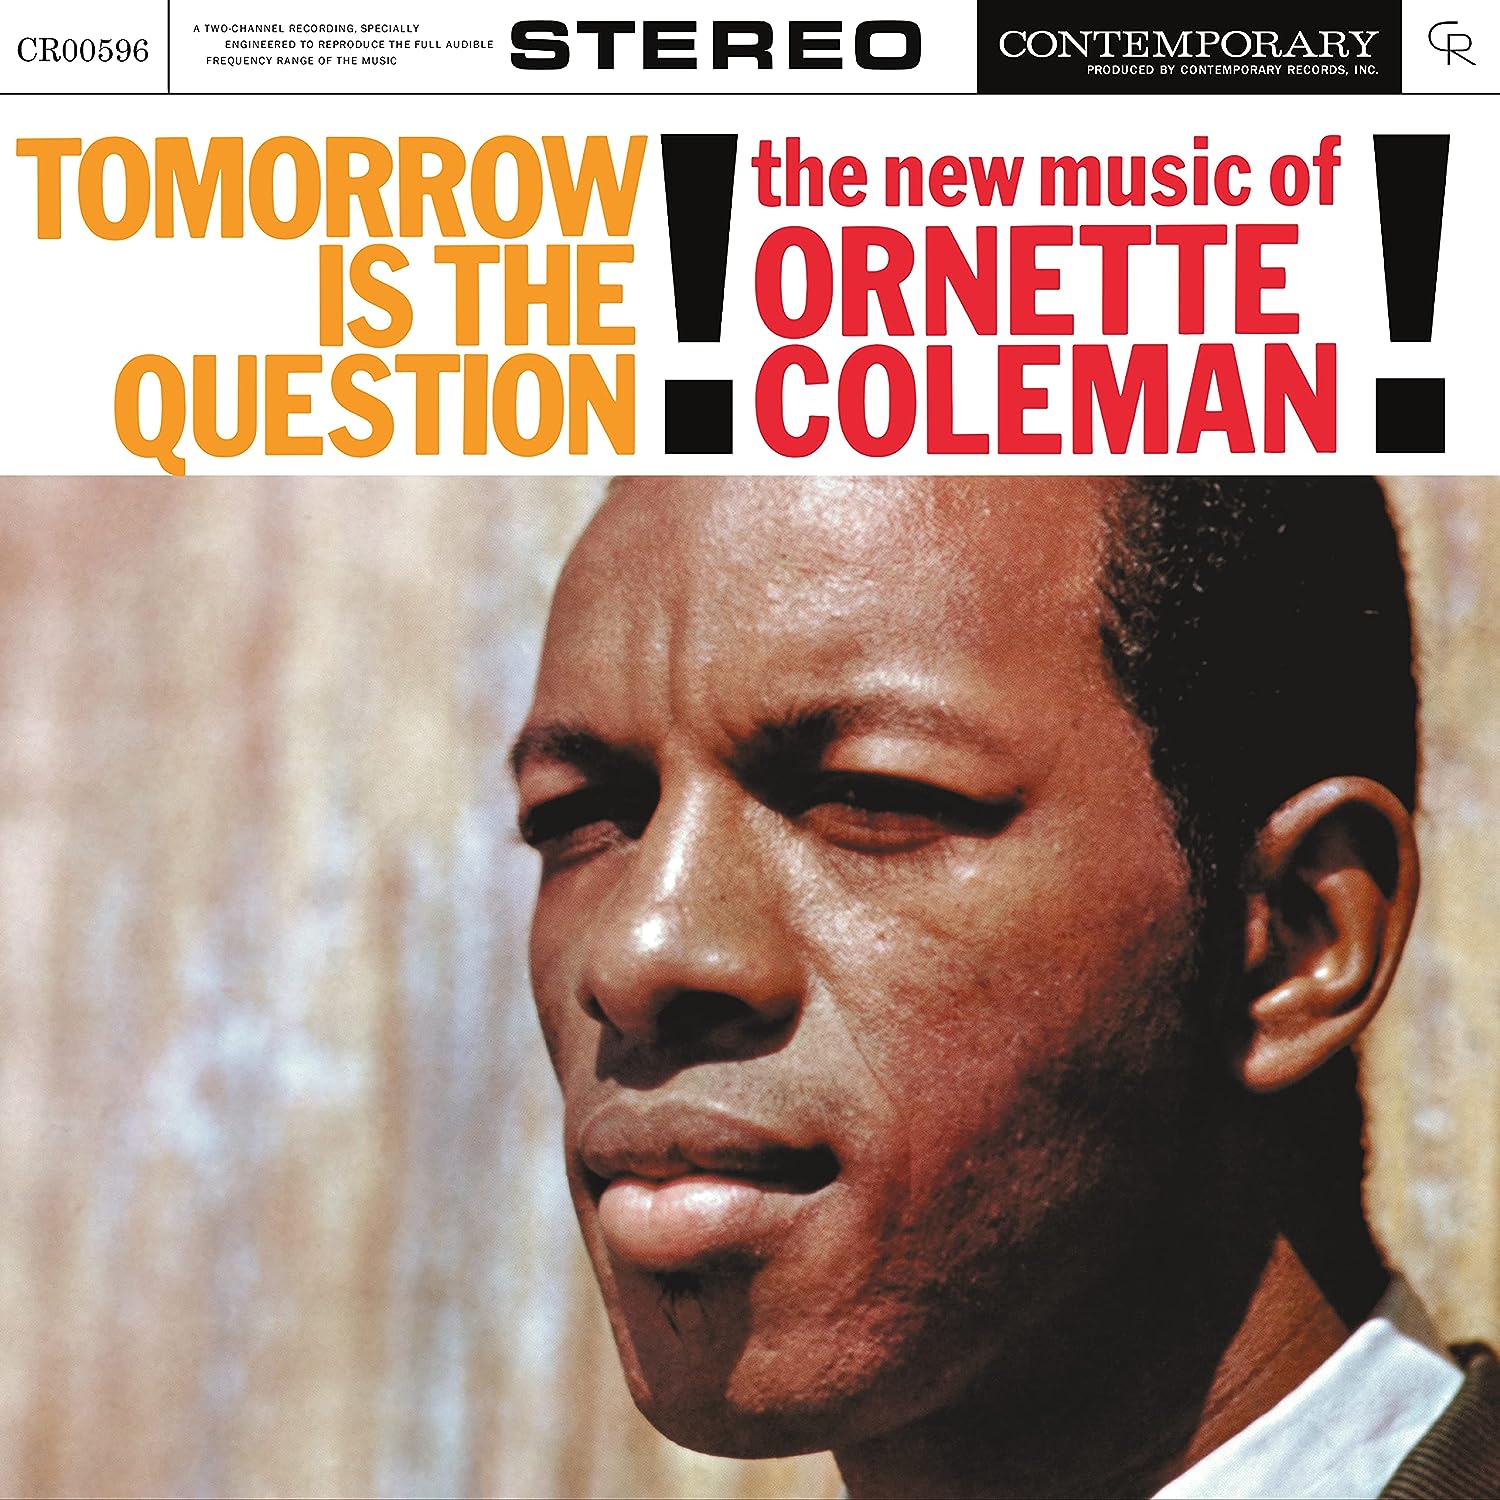 Джаз Universal (Aus) Ornette Coleman - Tomorrow Is The Question (Acoustic Sounds) (Black Vinyl LP) джаз universal us cannonball adderley quintet in chicago acoustic sounds